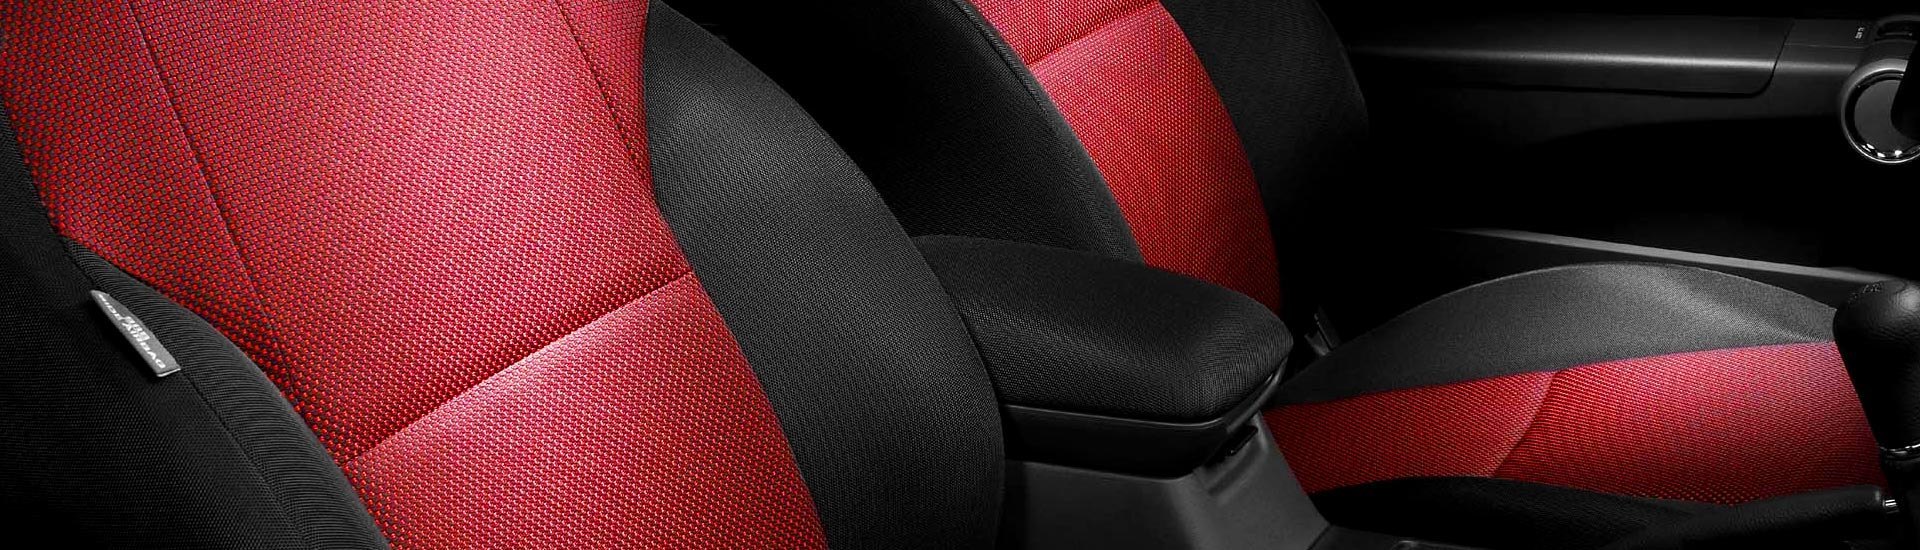 Protector Car Seat Cover Cushion Black Front Cover Universal Soft Space Memory